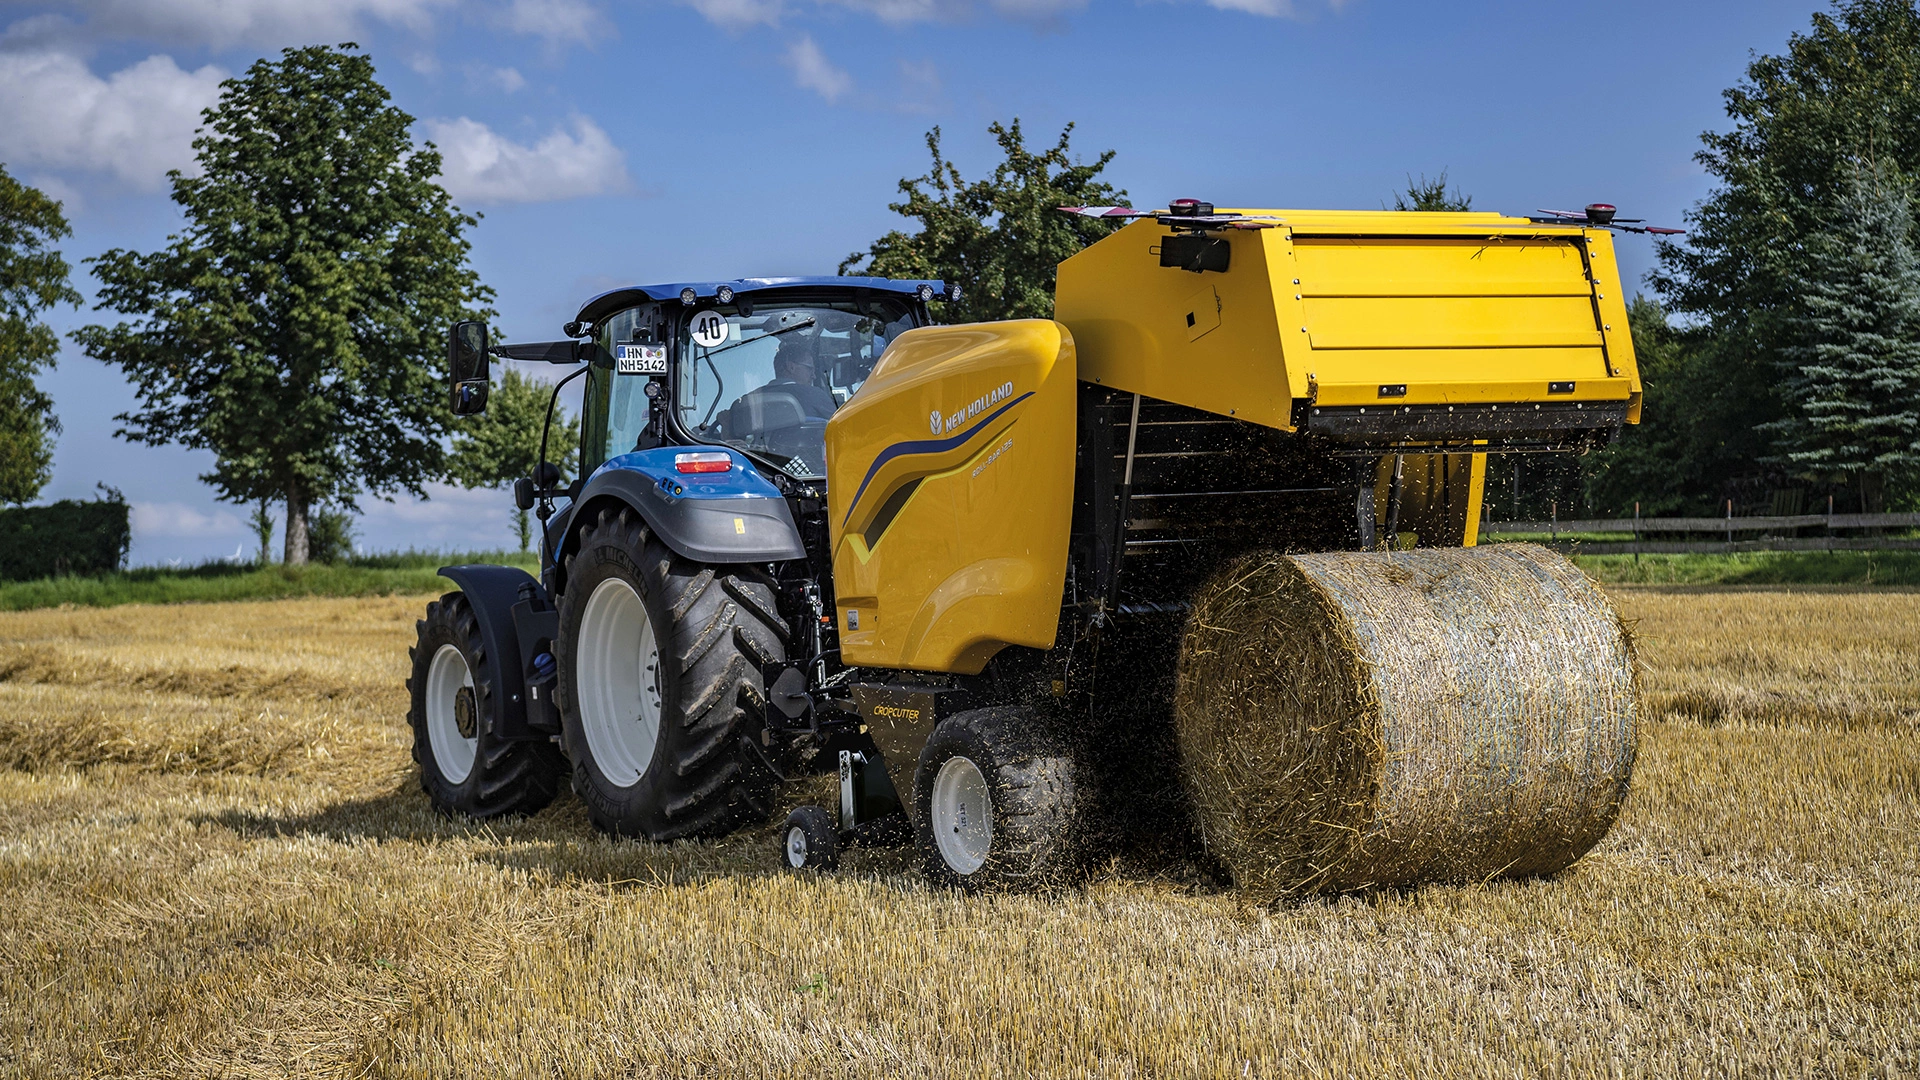 New Holland Tractor working with Roll Bar 125 round baler on an agricultural field.